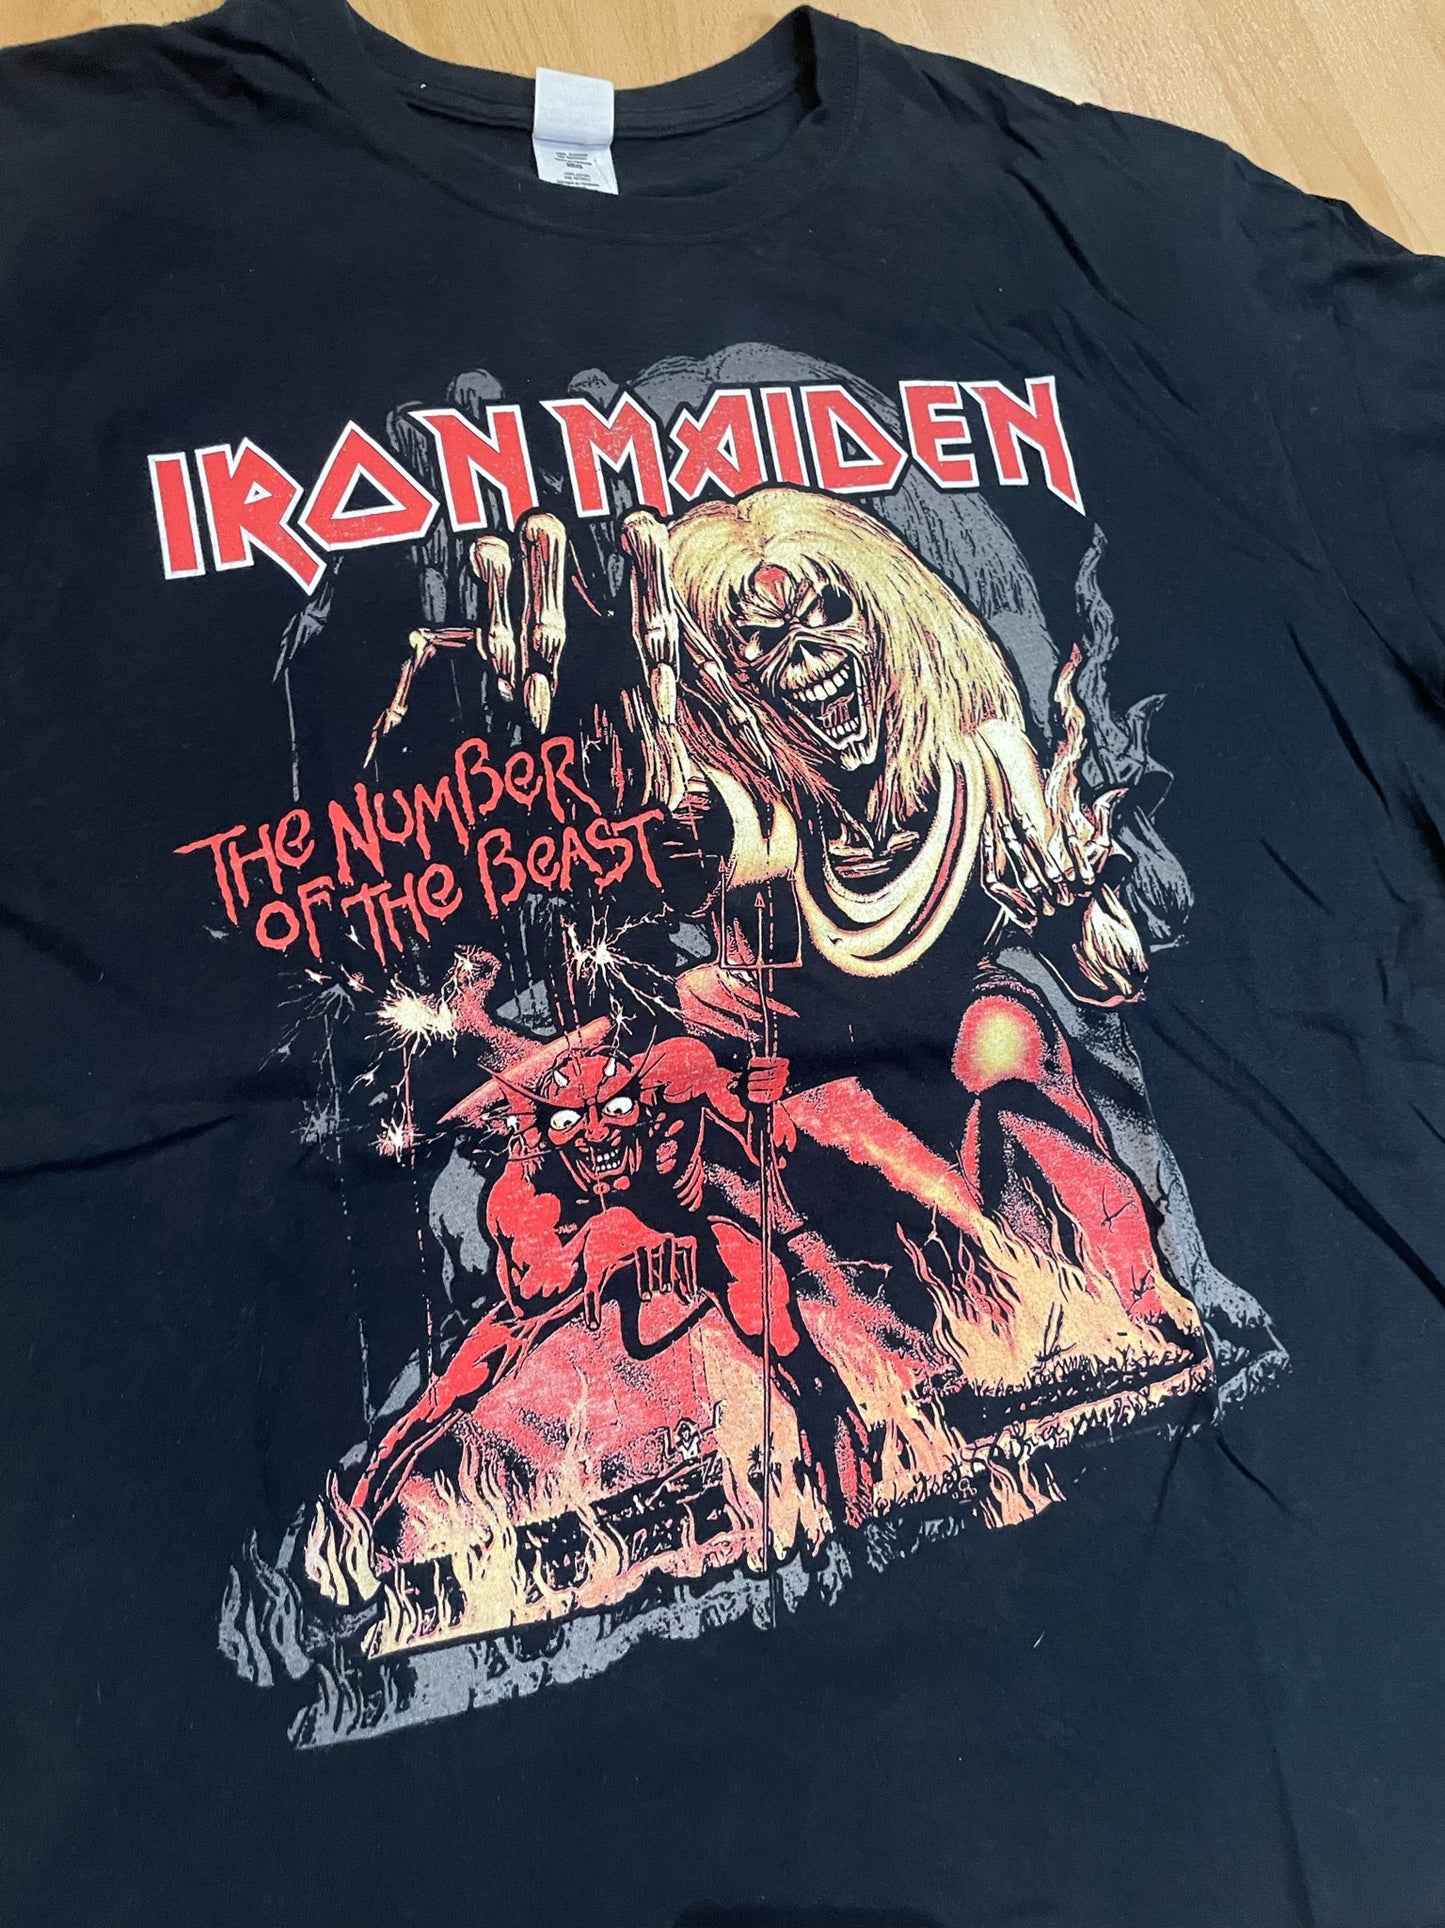 IRON MAIDEN "THE NUMBER OF THE BEAST" MUSIC BAND T-SHIRT  SZ: XXL